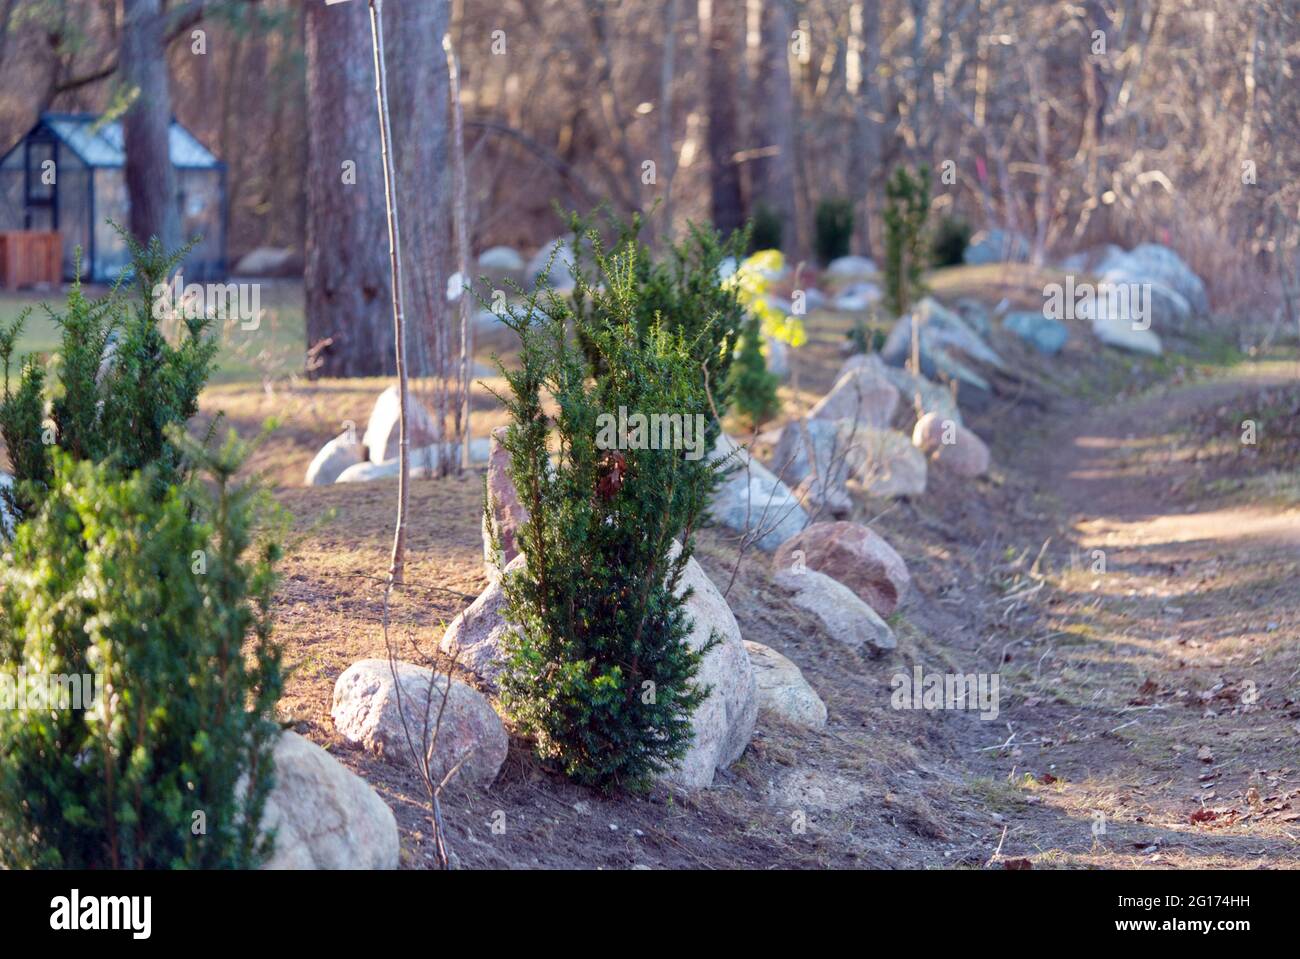 Landscape garden with junipers, various ornamental trees and stones in spring Stock Photo